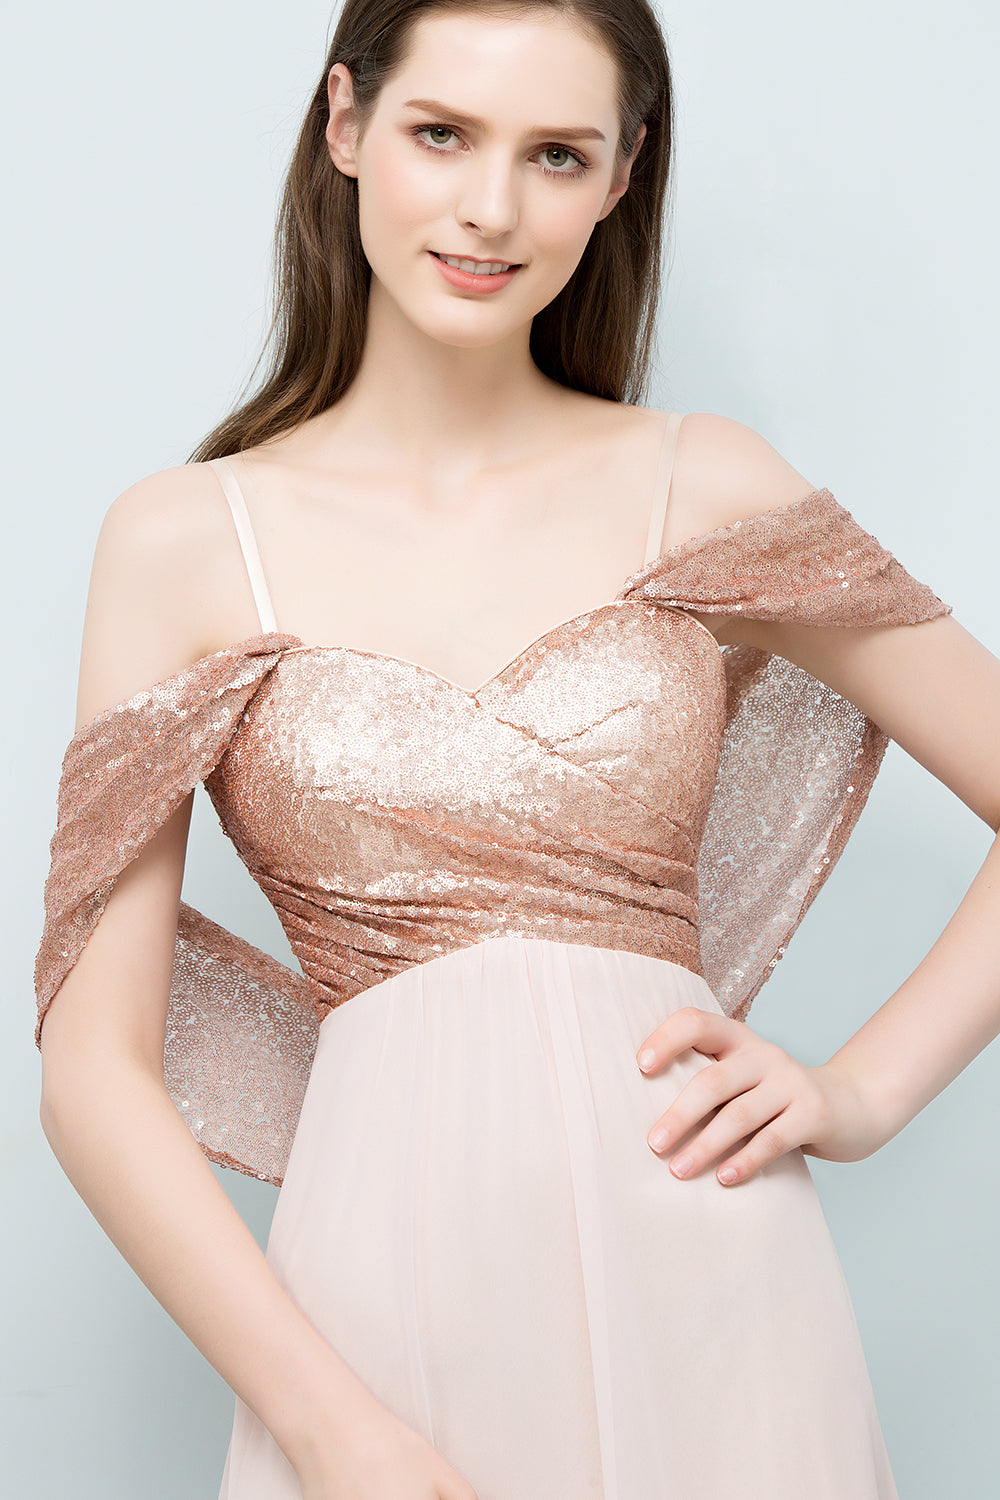 A-line Chiffon Sequins Straps Sweetheart Long Bridesmaid Dresses with Sleeves-BIZTUNNEL